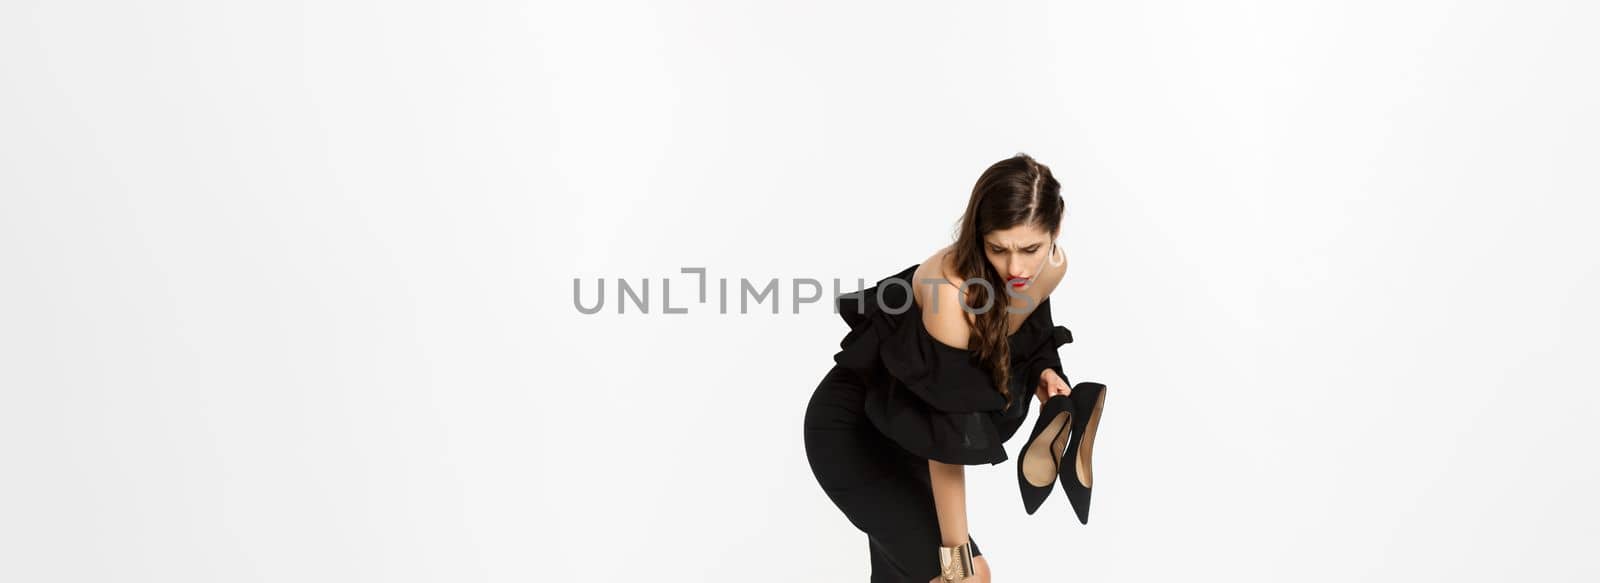 Beauty and fashion concept. Full length of woman feeling pain in feet, take-off high heels and rubbing foot with tired face, standing in black dress over white background.